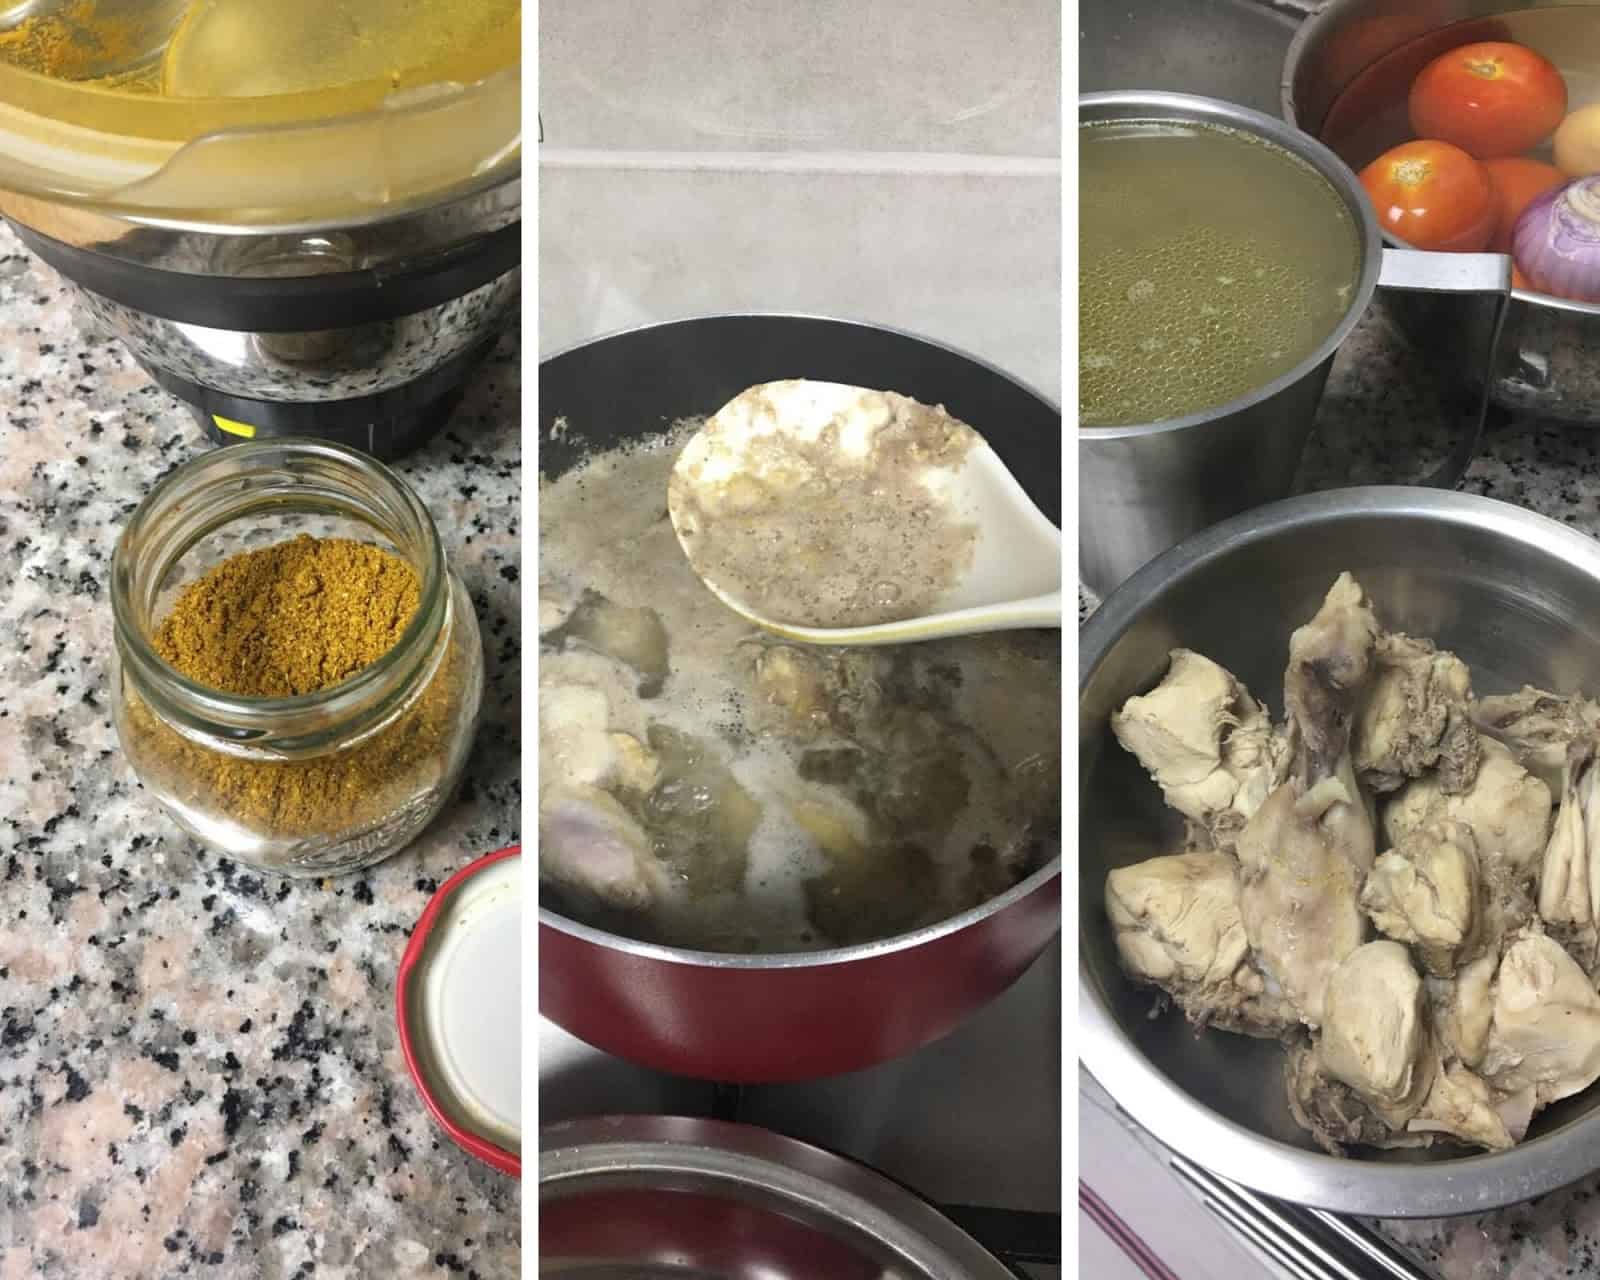 A collage of three images showing bezar spice mix, chicken broth making and boiled chicken.